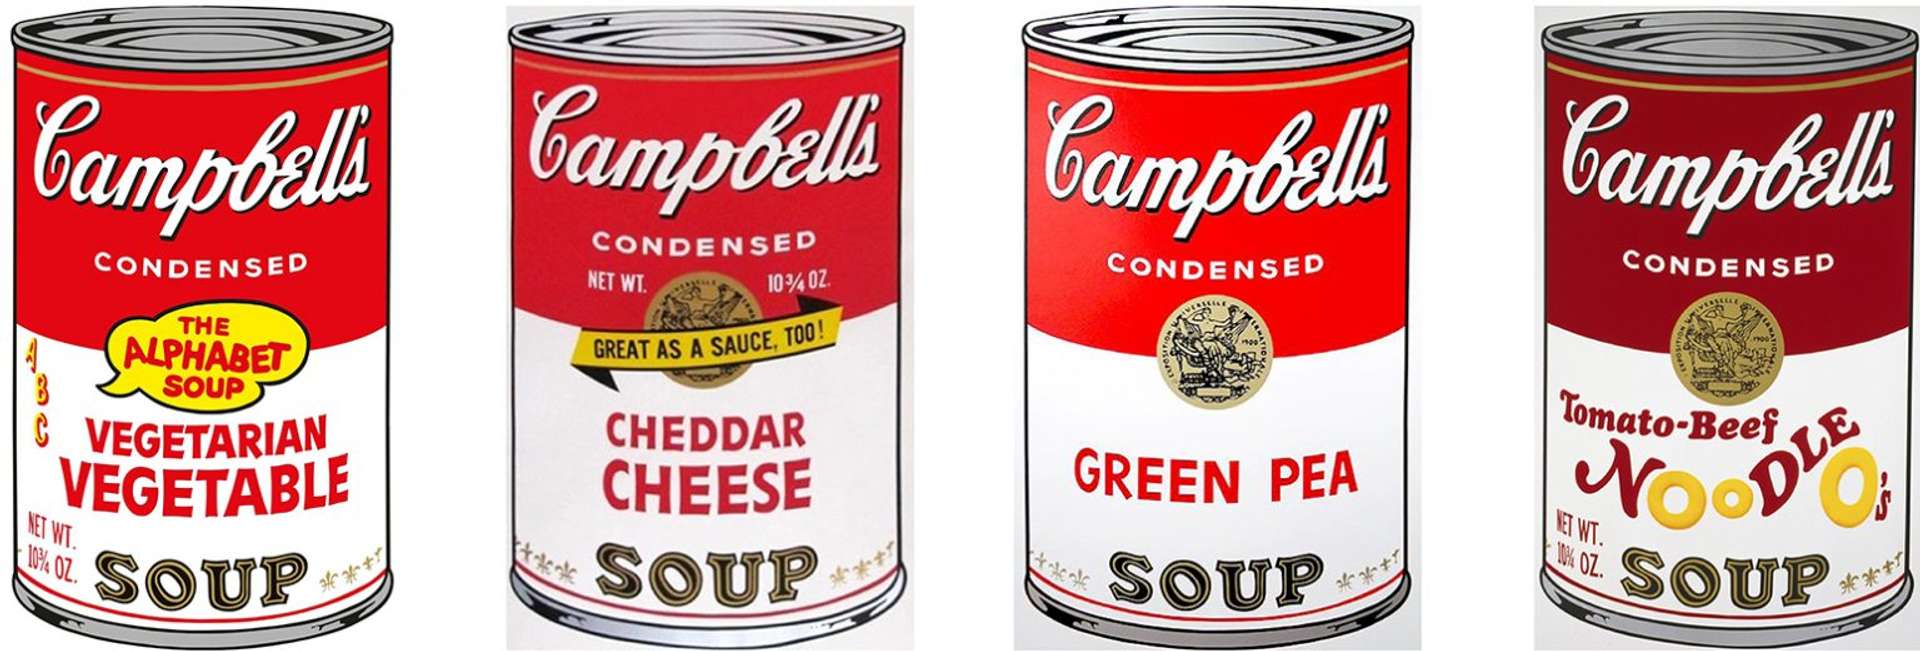 Campbell's Soup Cans by Andy Warhol - MyArtBroker